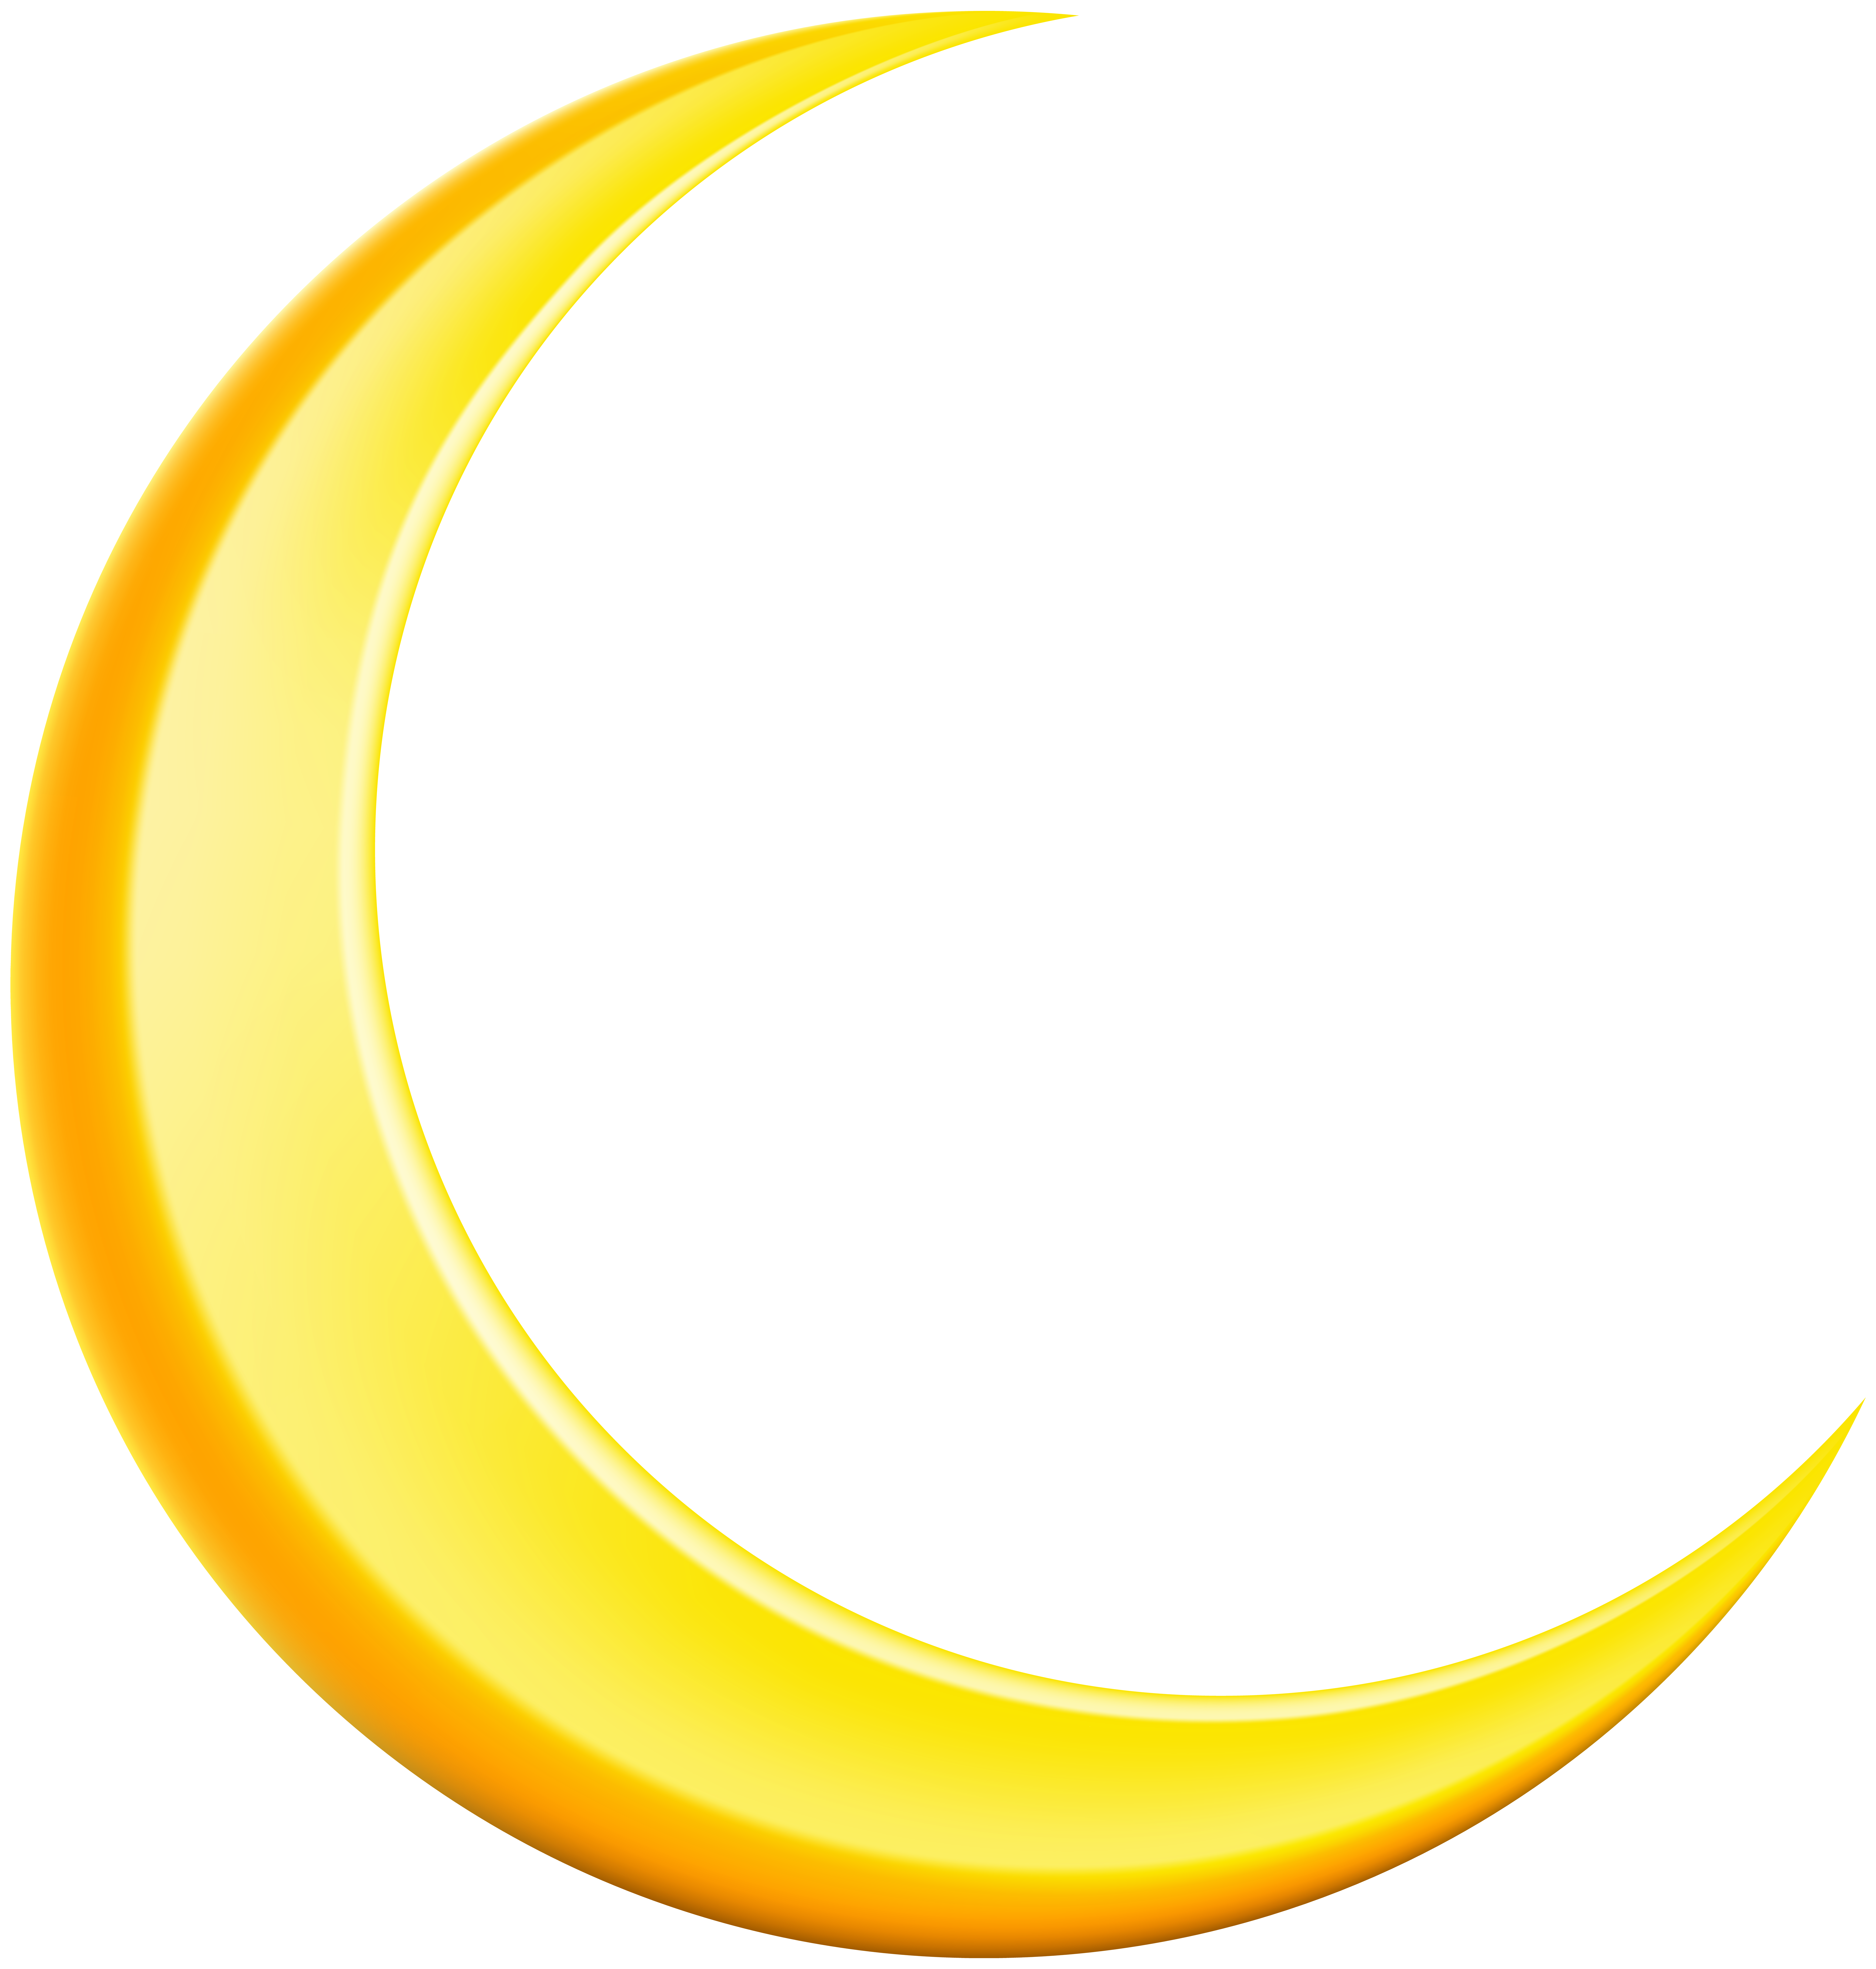 Transparent Full Moon Images  Free Photos, PNG Stickers